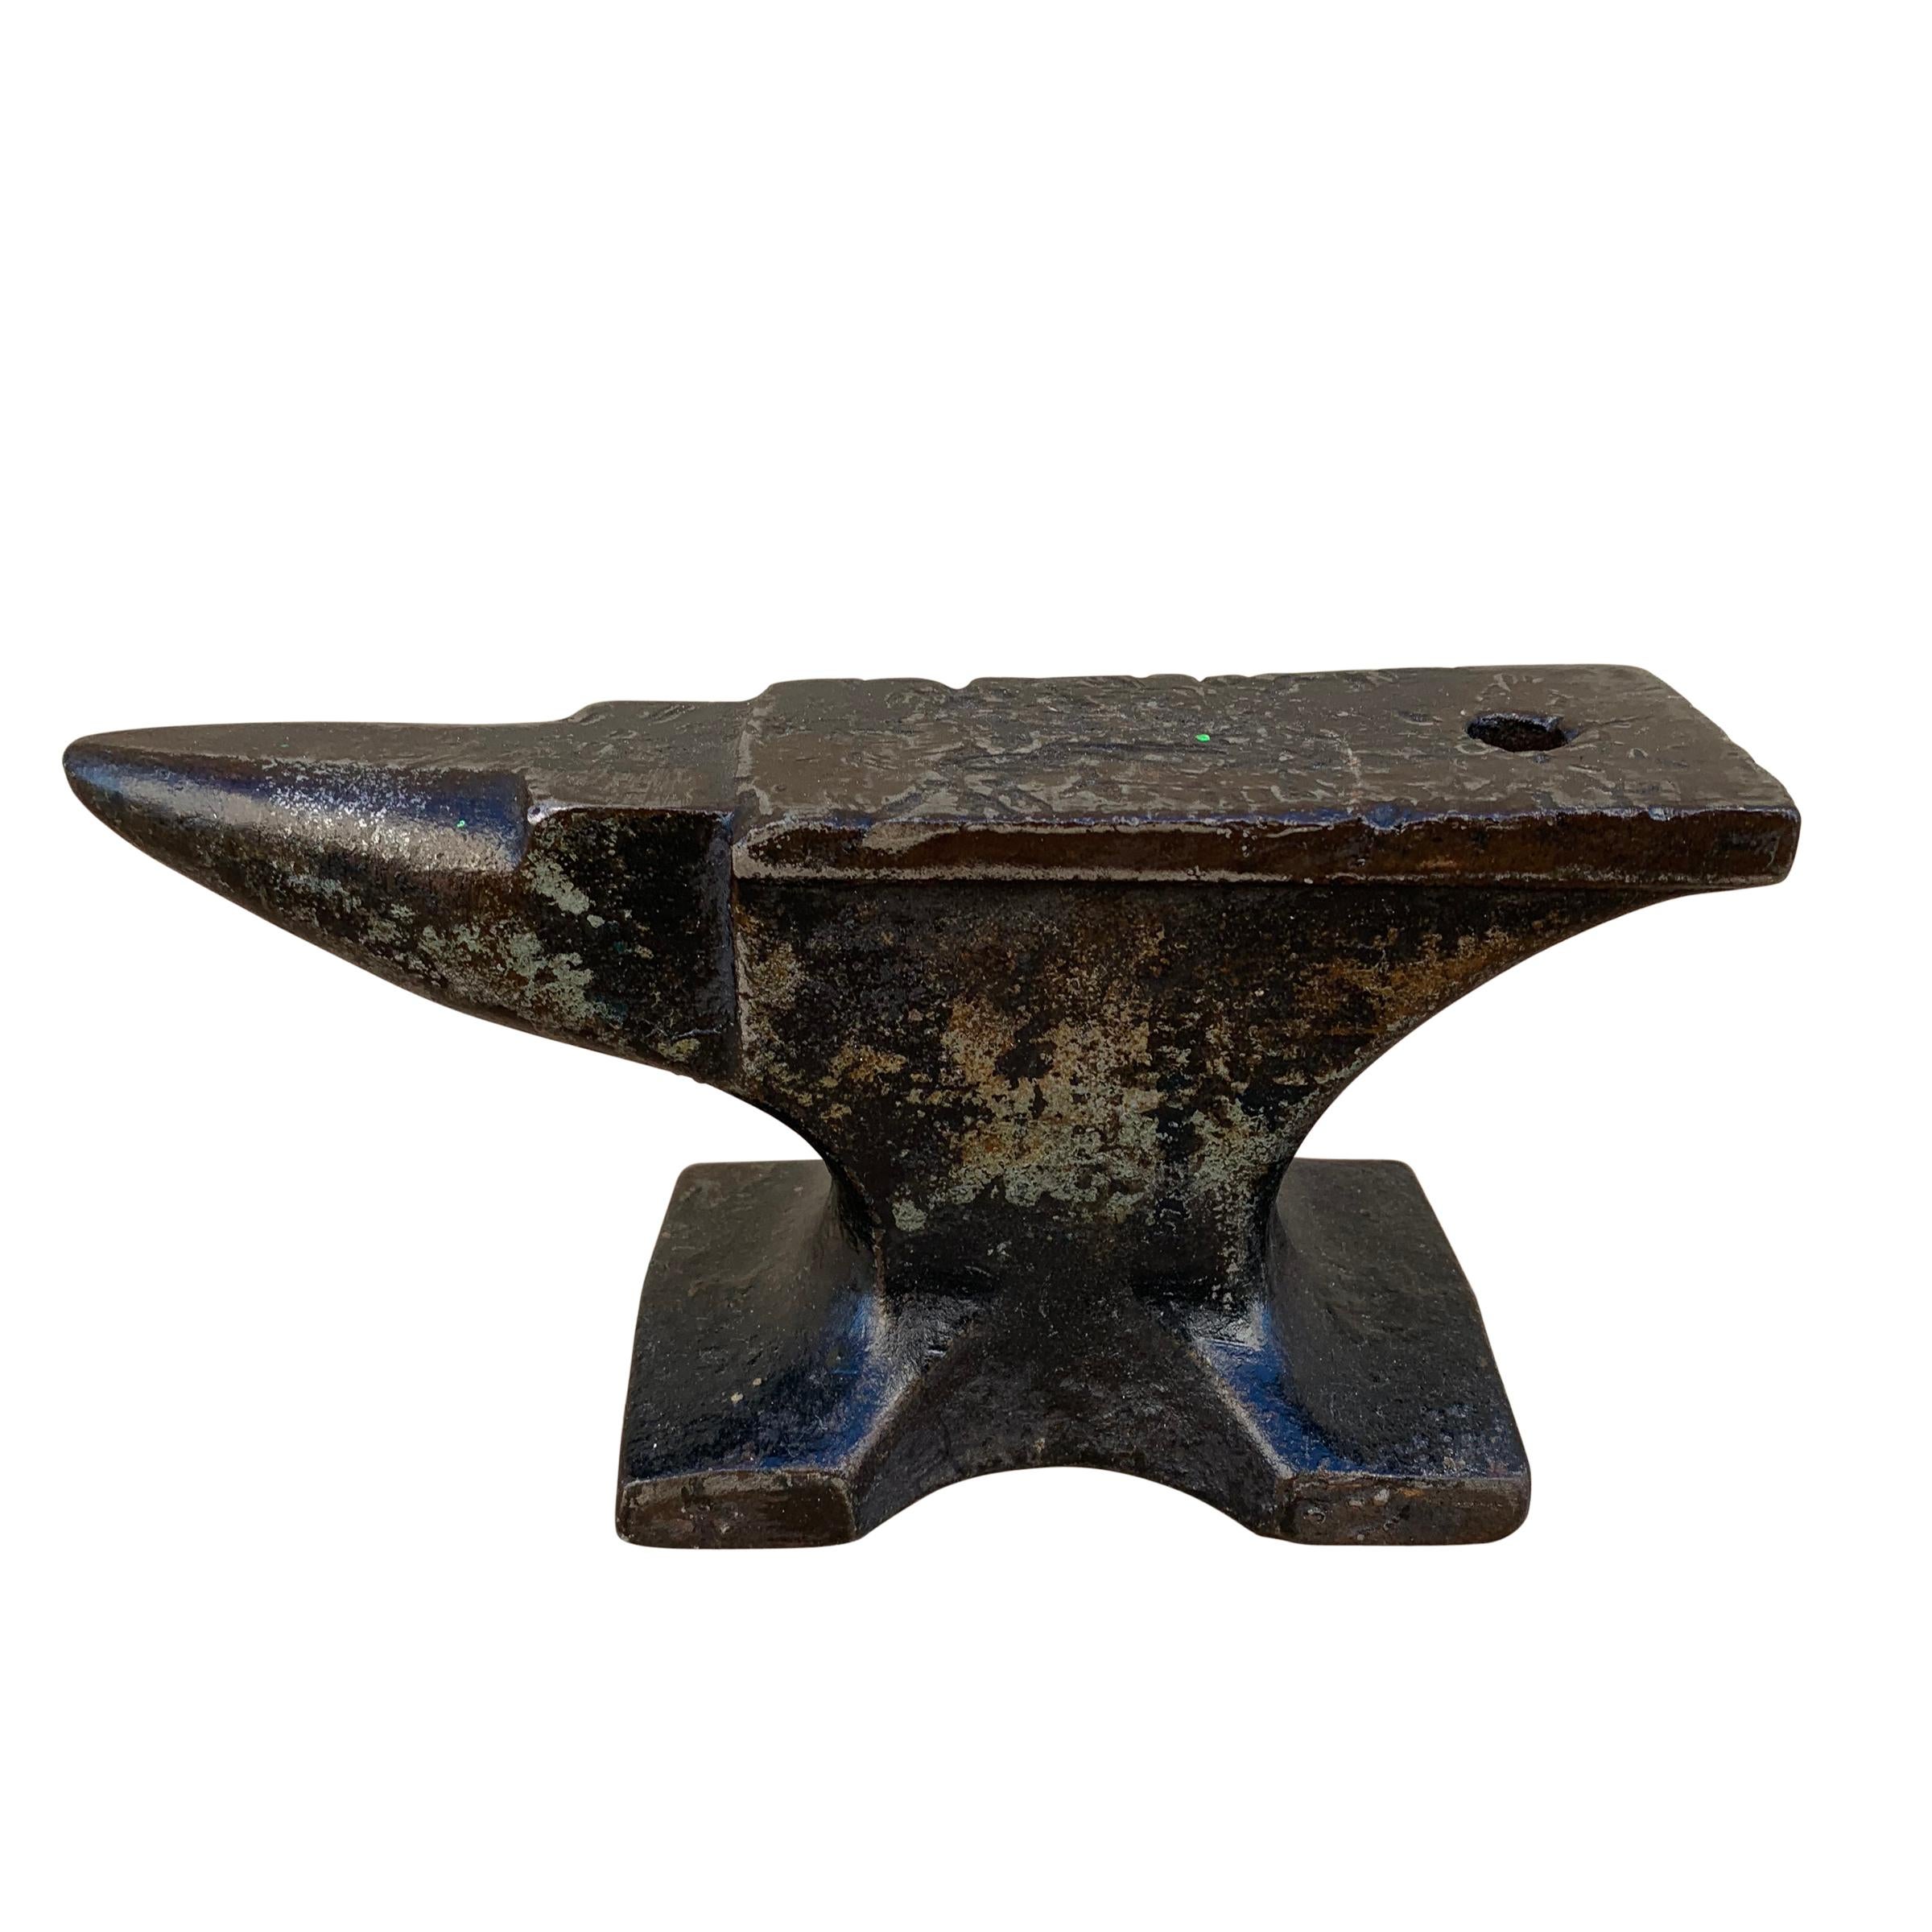 Miniature Early 20th Century American Iron Anvil